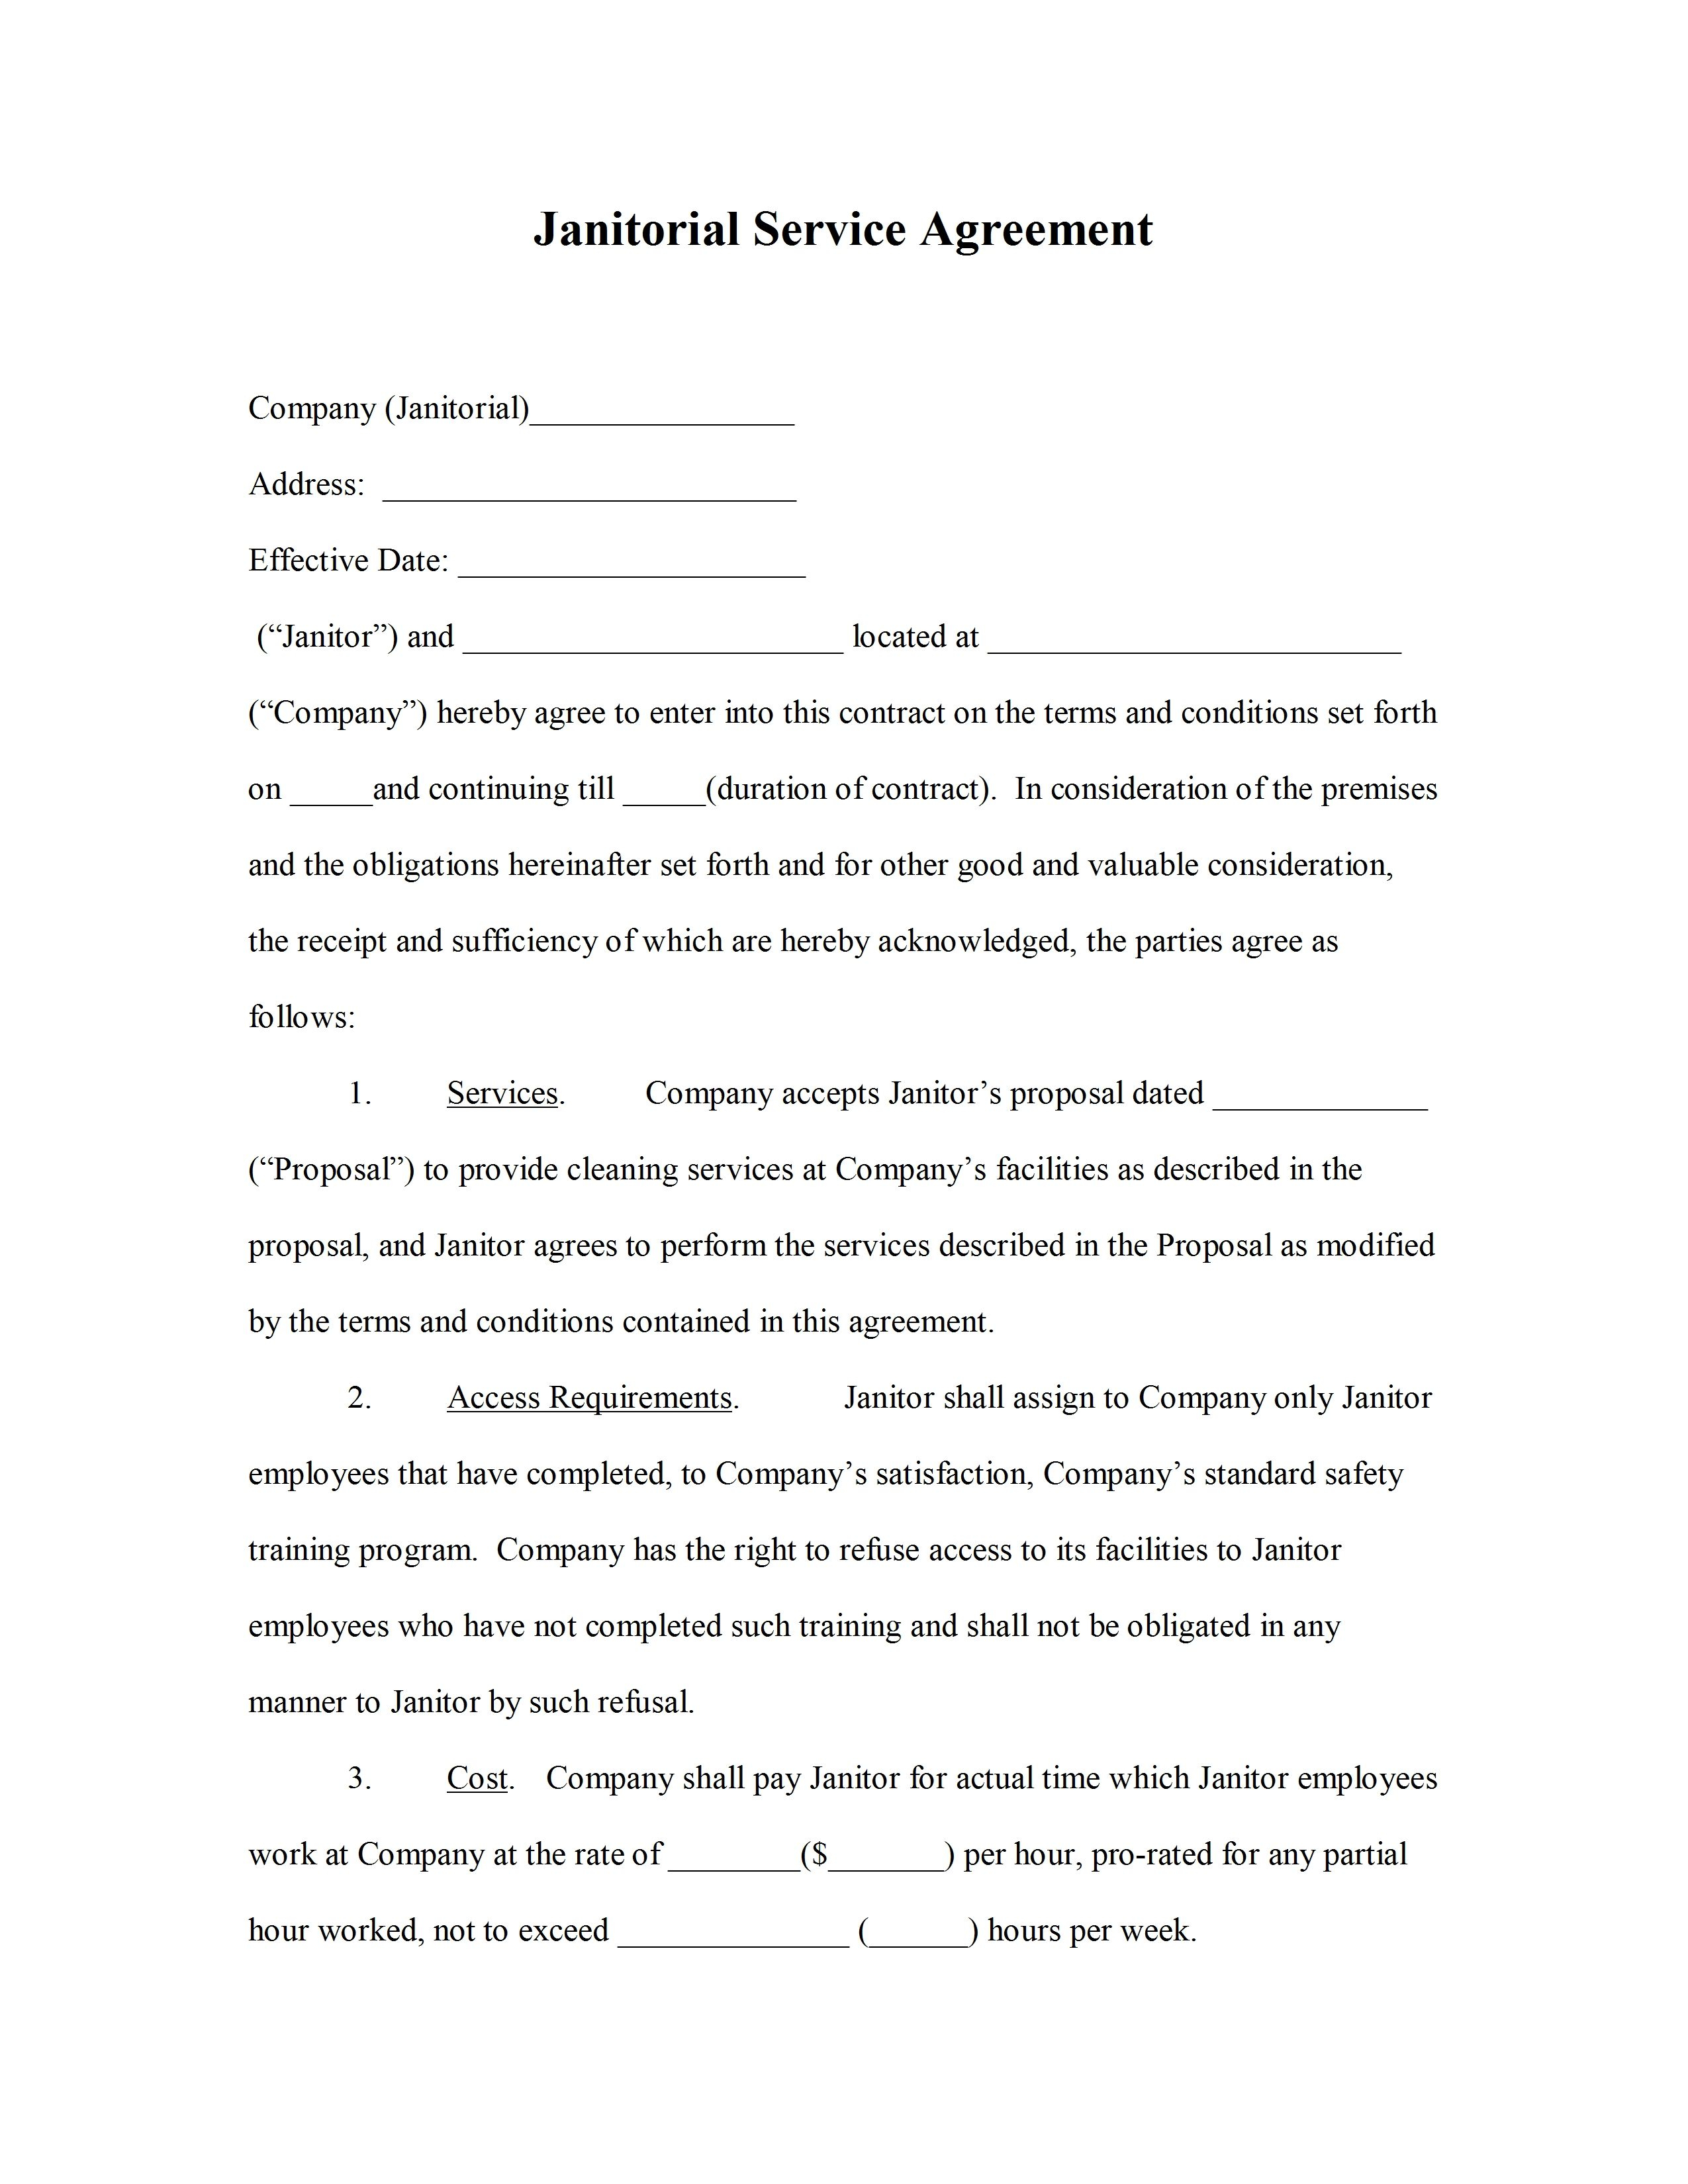 Maintenance Agreement Terms And Conditions 003 Service Contract Template Word Ideas Incredible Simple